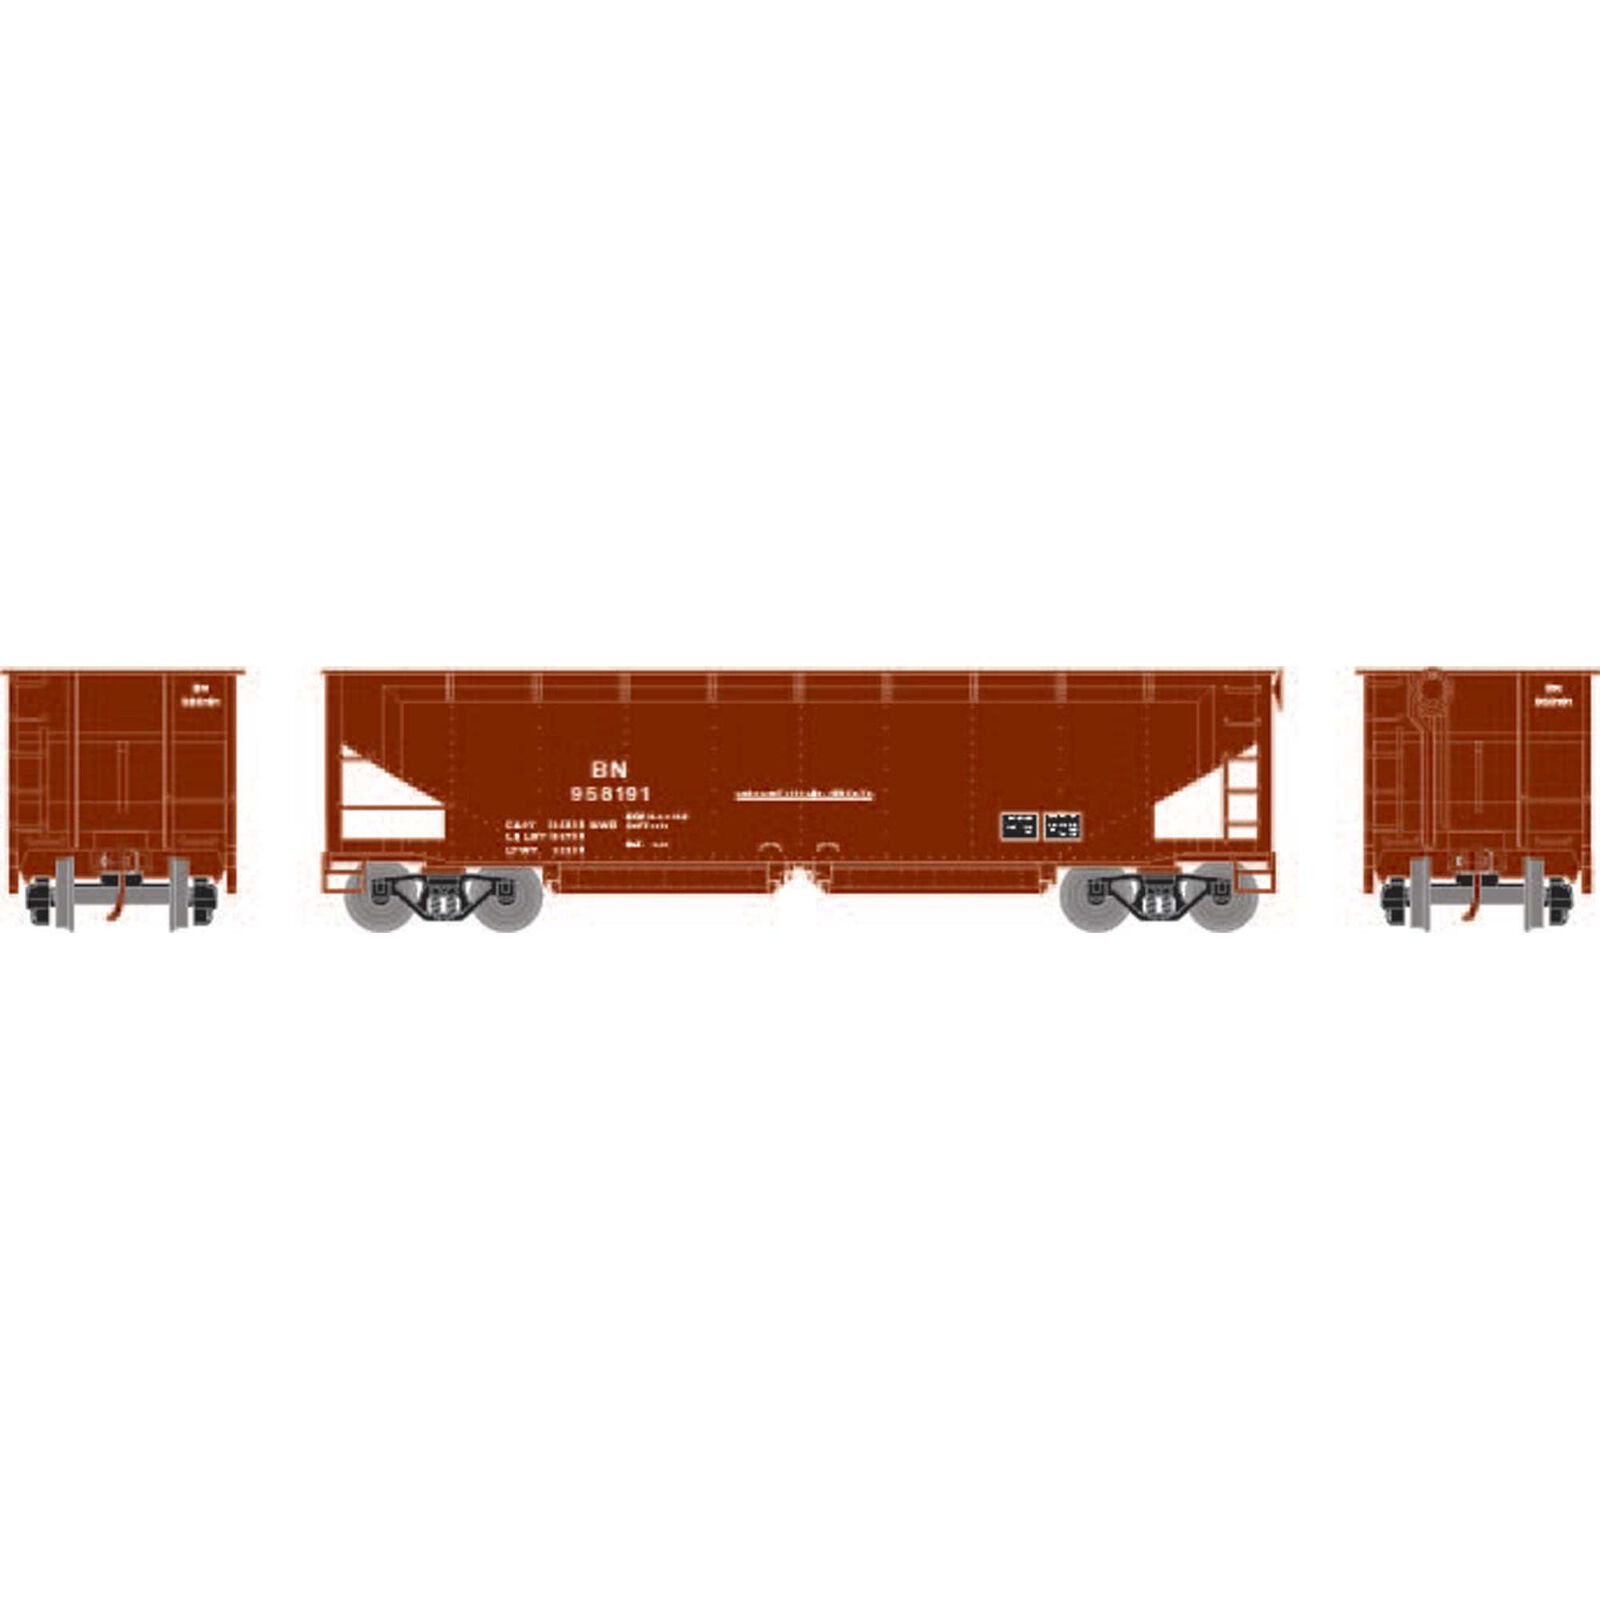 HO RTR 40' Offset Ballast Hopper with Load, BN #958191